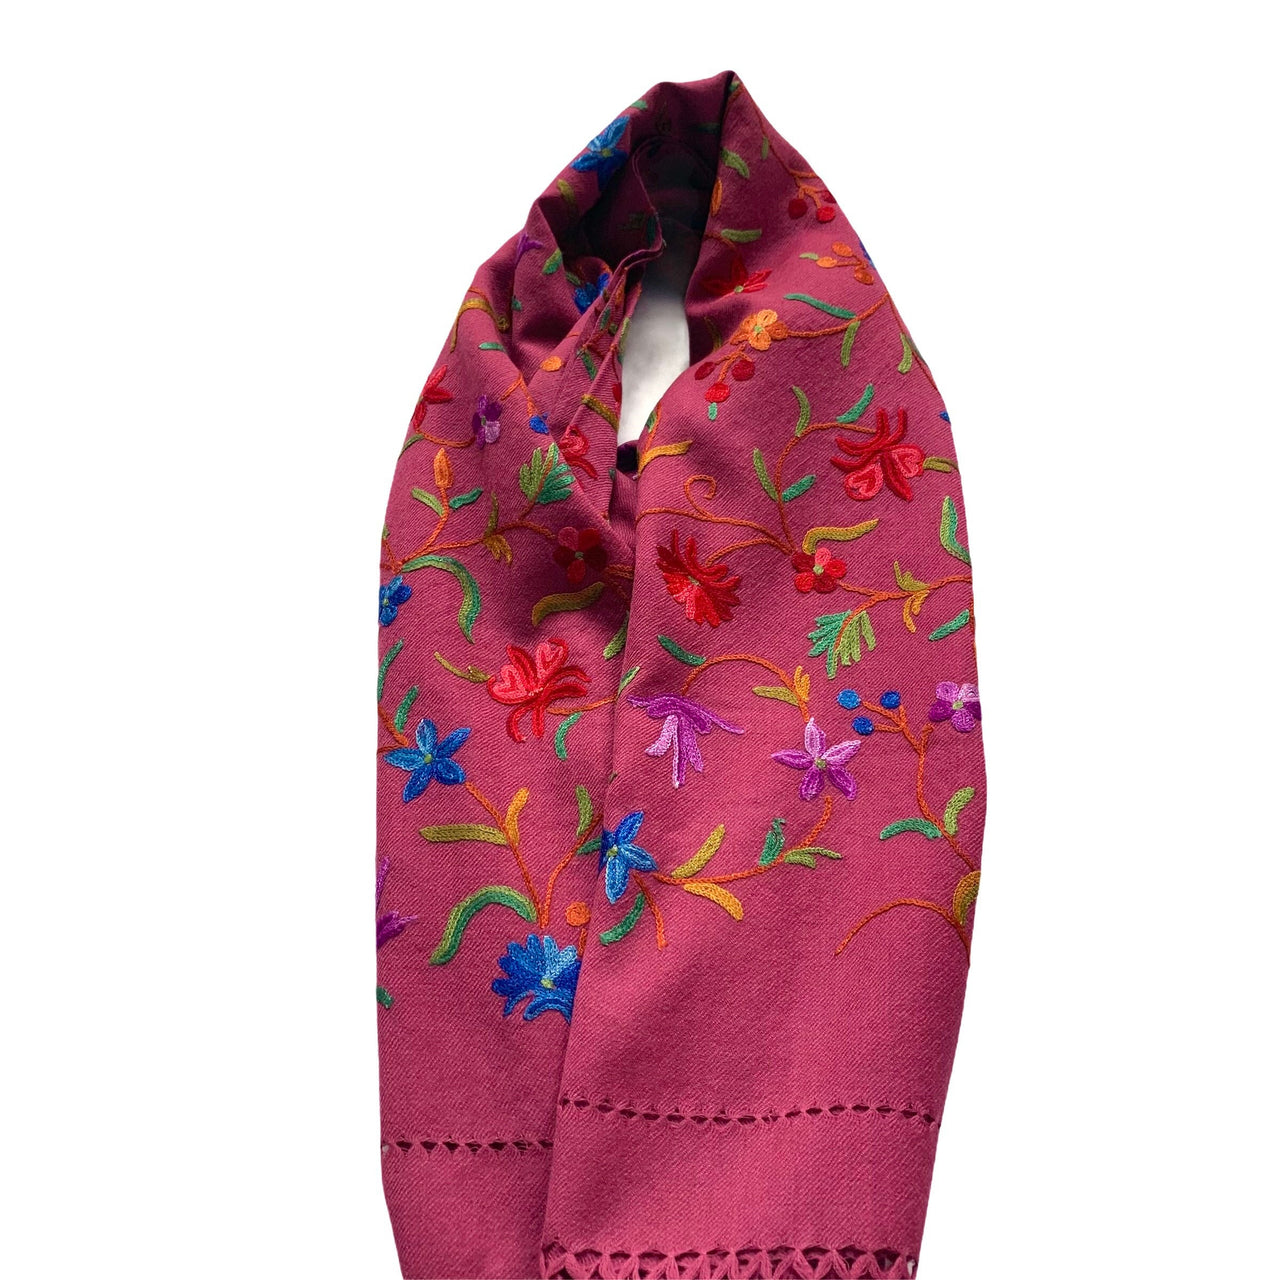 Pink Fuchsia Floral Shawl  Wool Scarf Wrap Hand Embroidered Stole